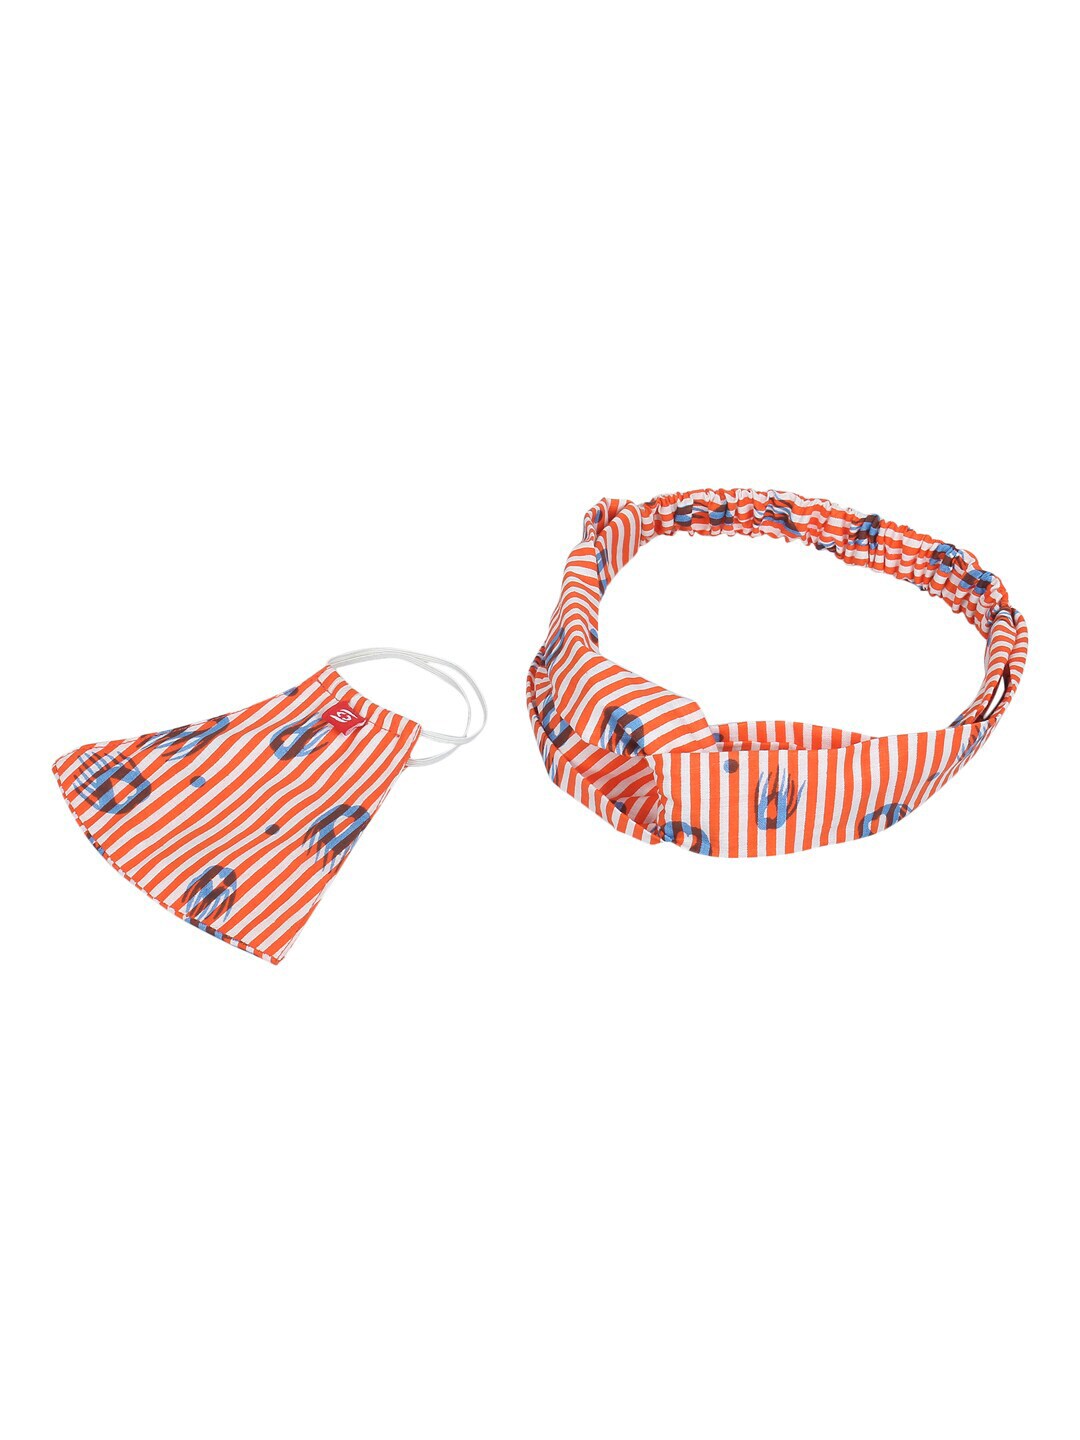 Swiss Design Women Orange & White 2-Ply Reusable Cloth Mask with Head Band Price in India